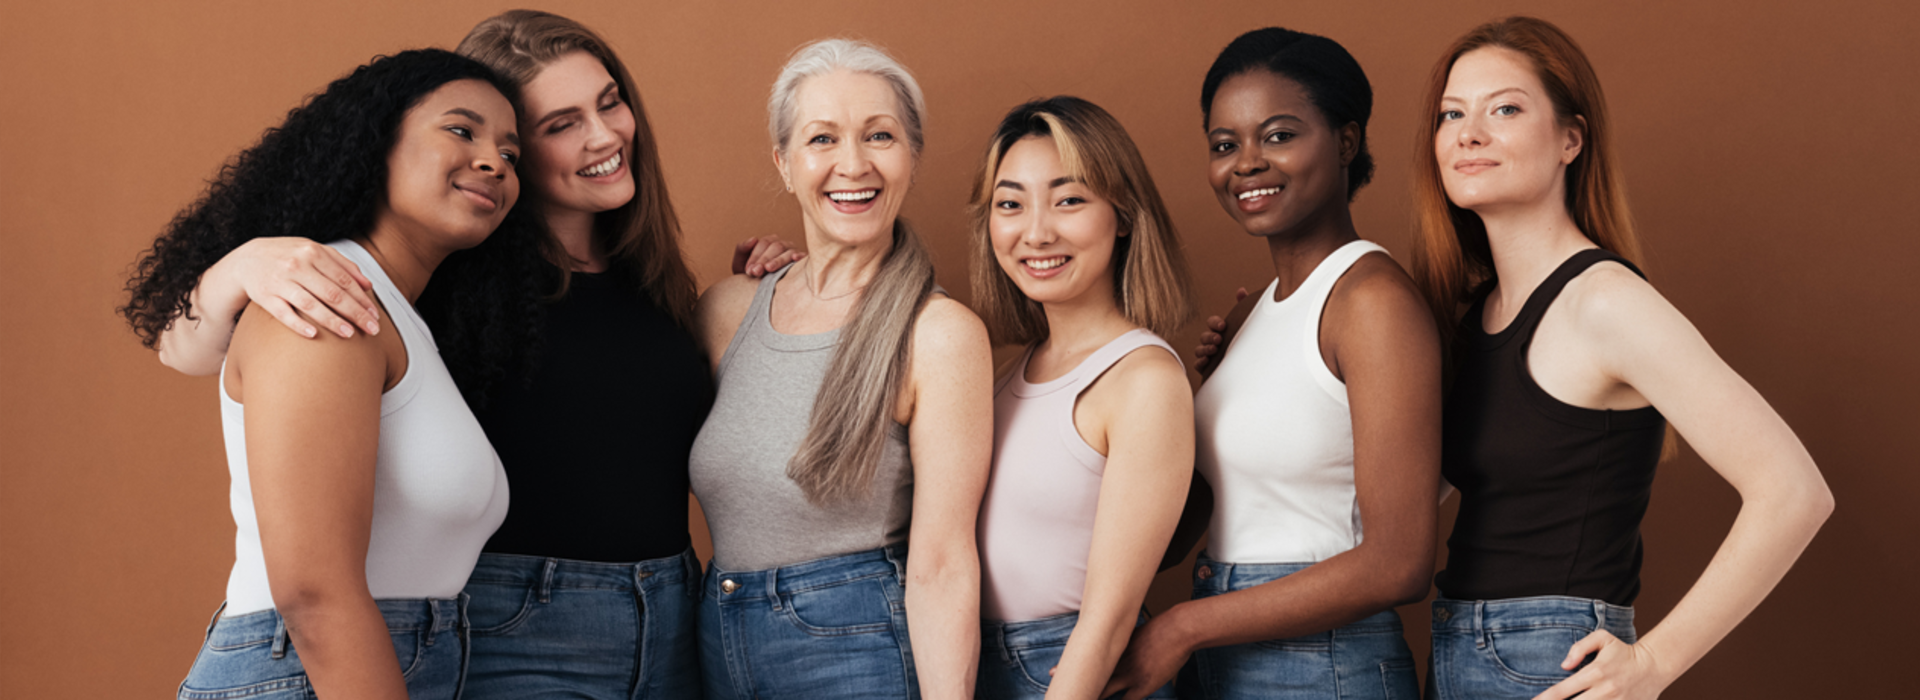 Group of women of different ages posing against brown background looking at camera